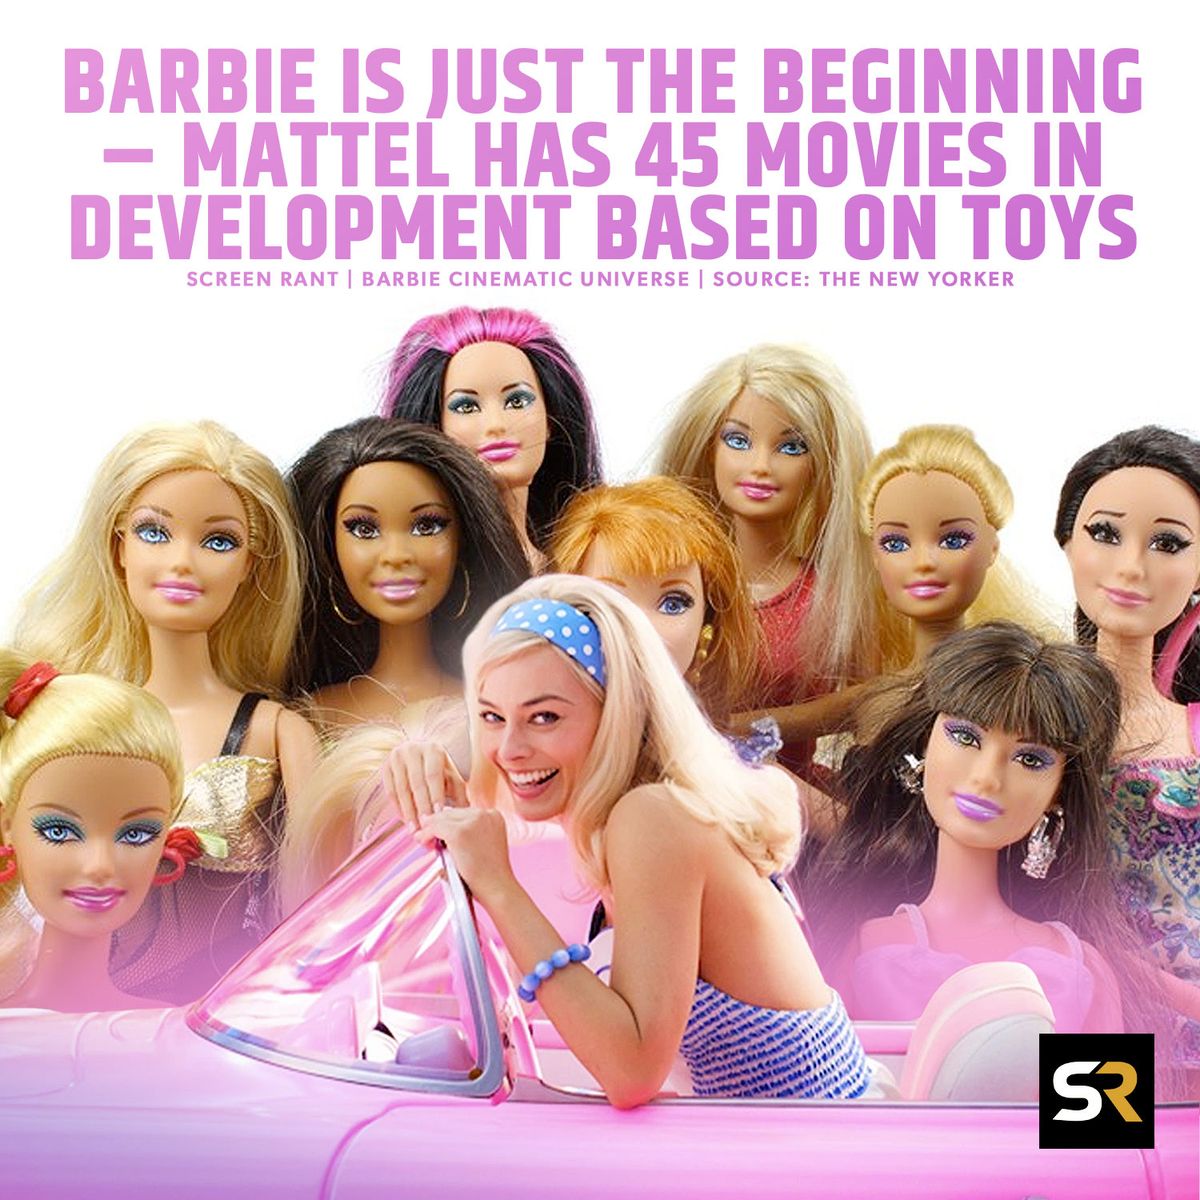 Barbie' Movie: All the Upcoming Movies Based on Mattel Toys, Brands